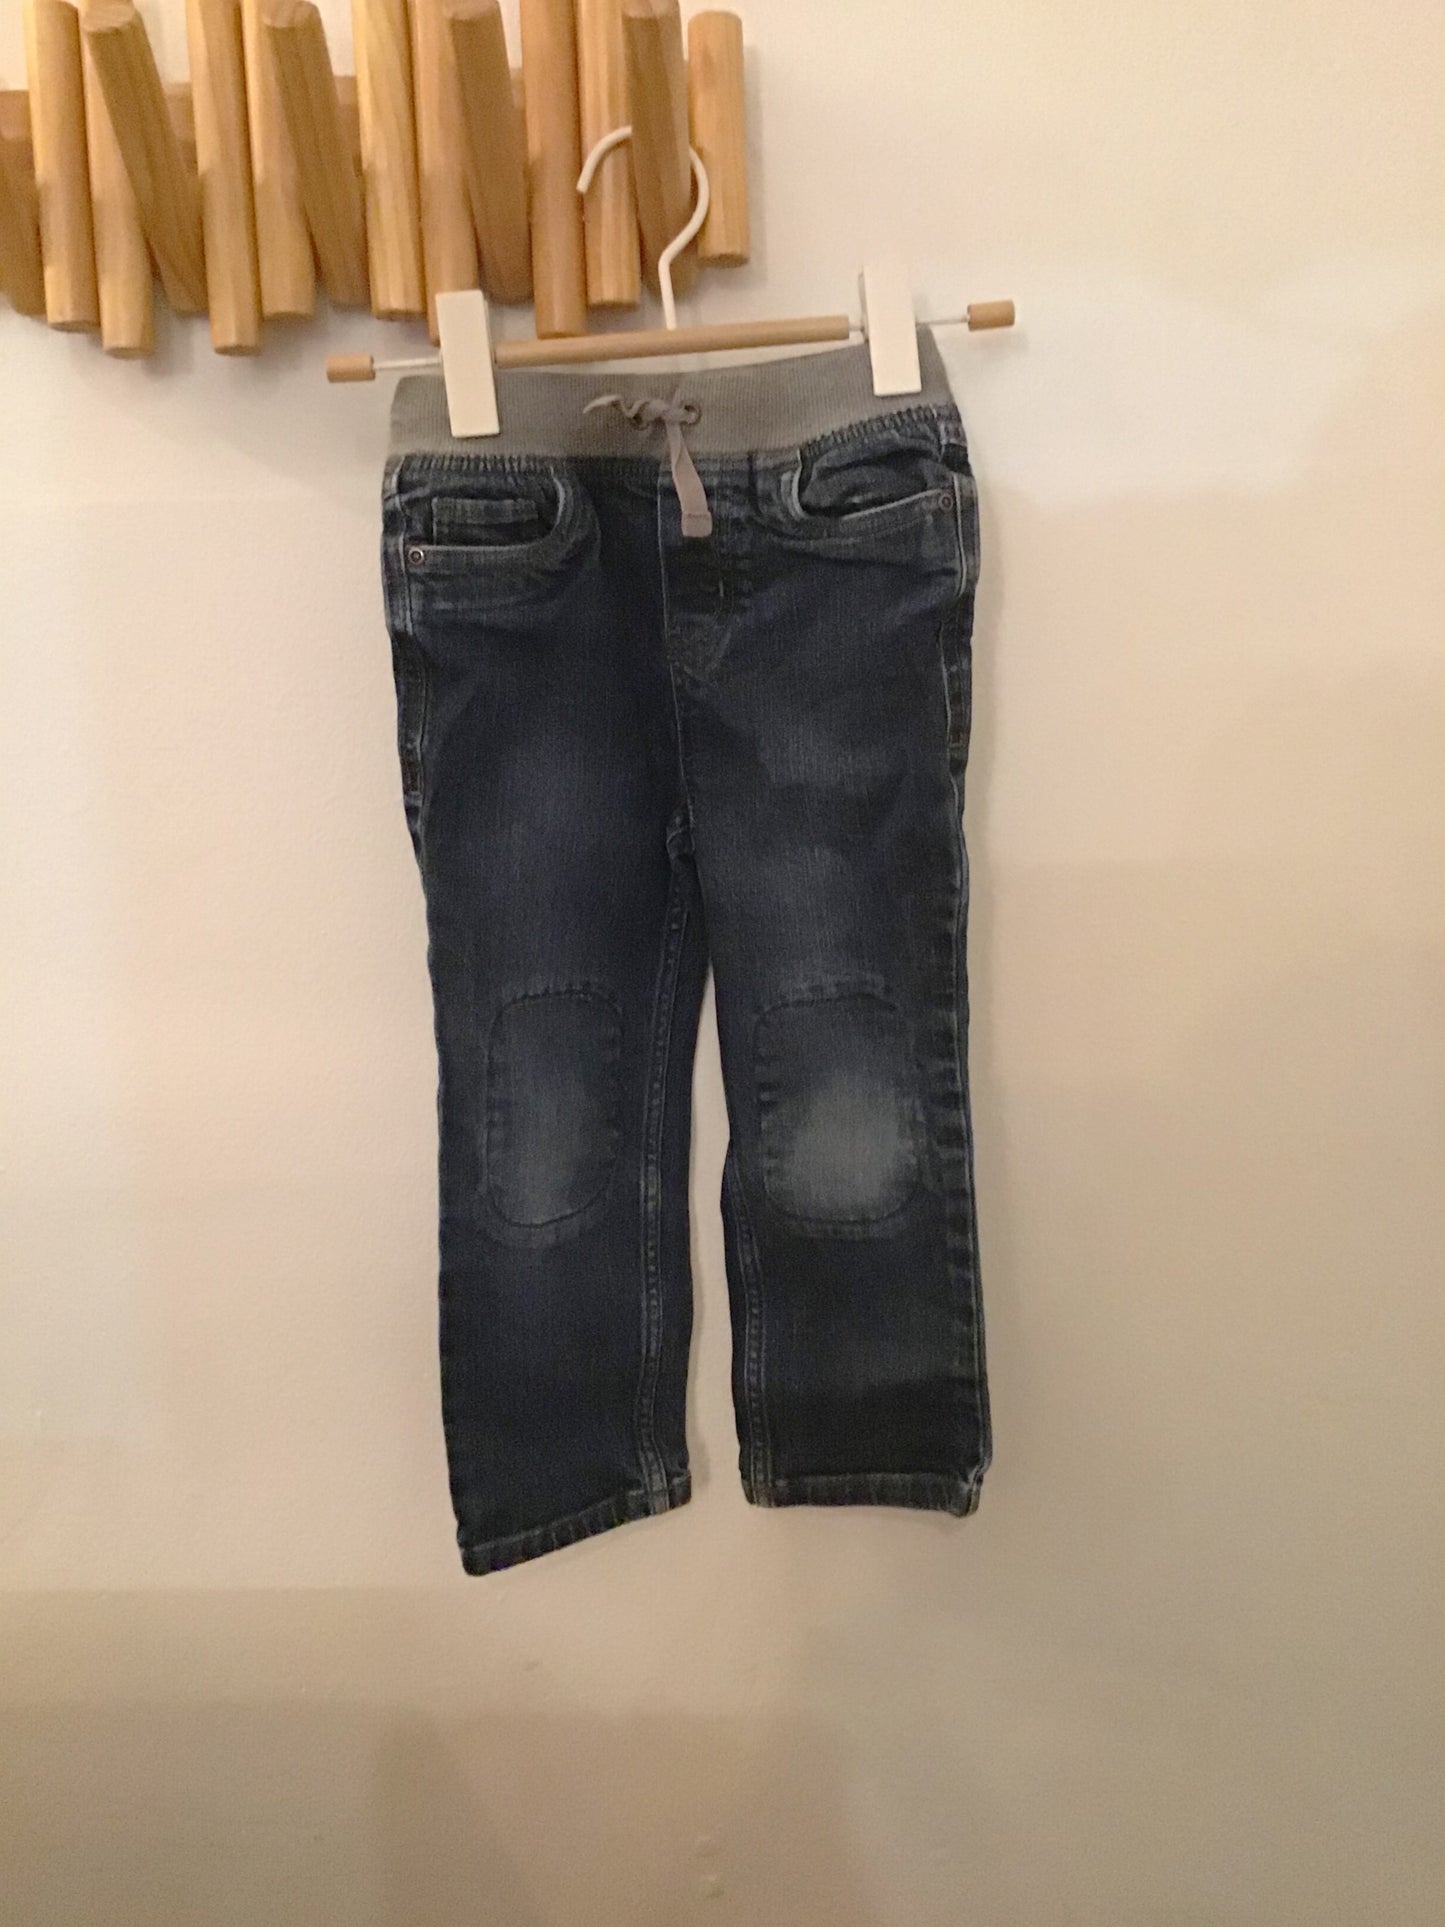 Hanna Andersson pull on relaxed jeans 5y